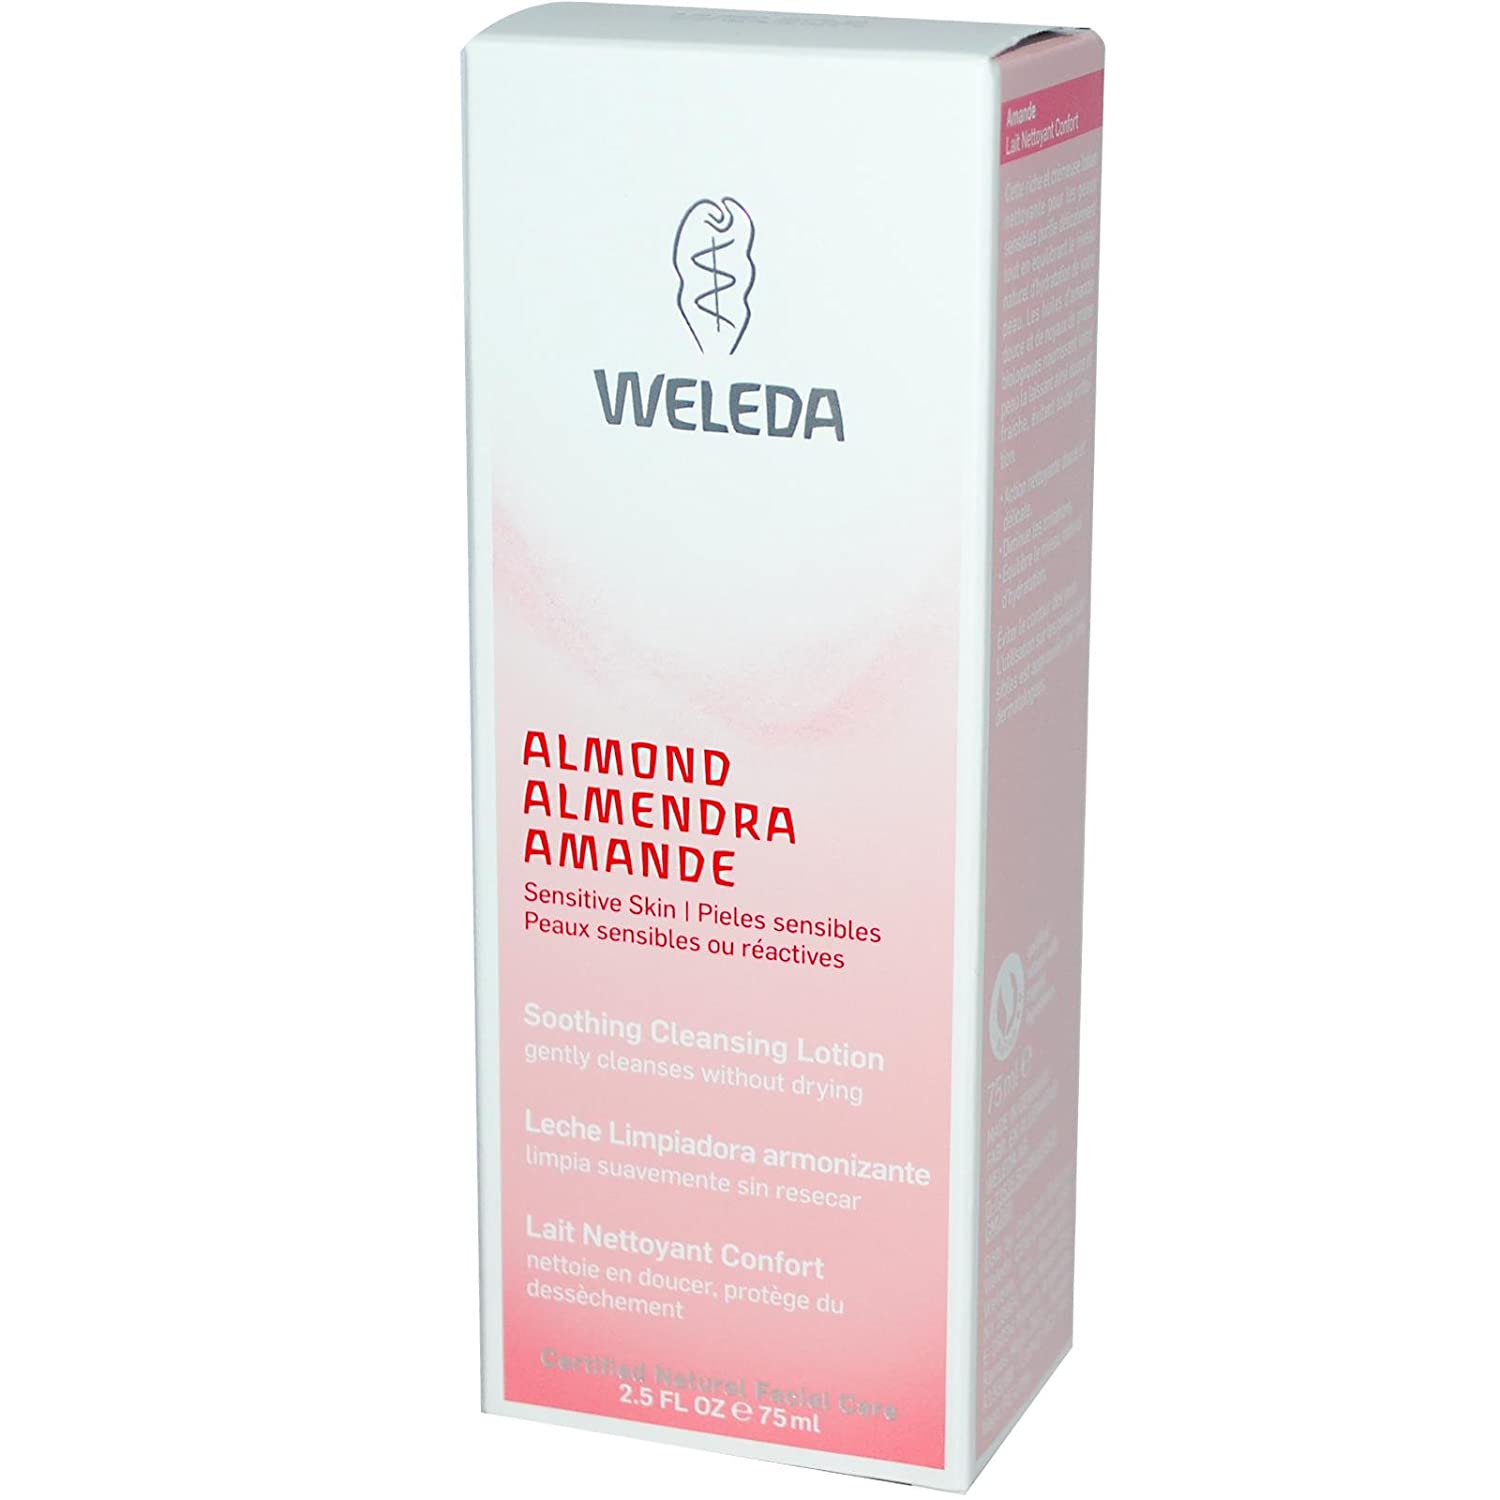 Weleda Almond Soothing Cleansing Lotion 75ml – Pack of 3